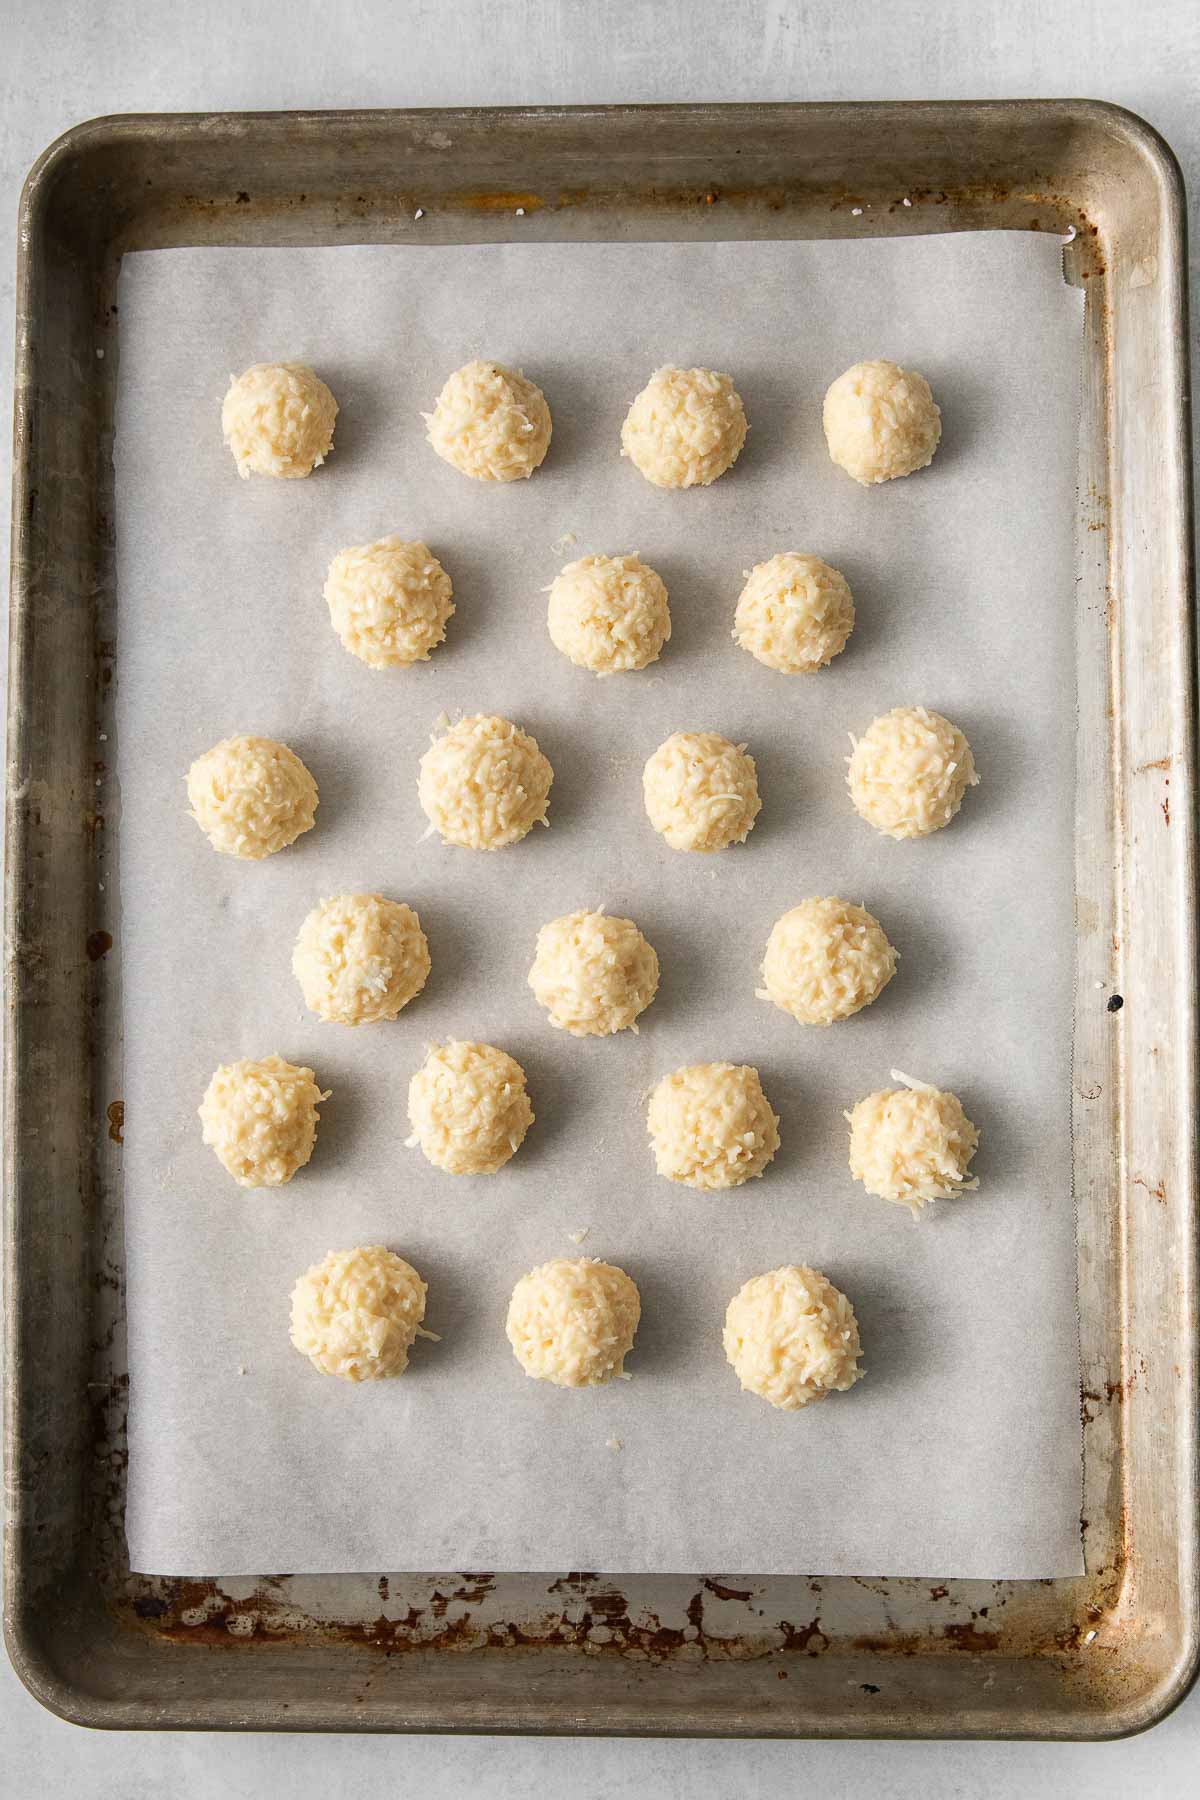 baking sheet with 21 coconut balls lined up.